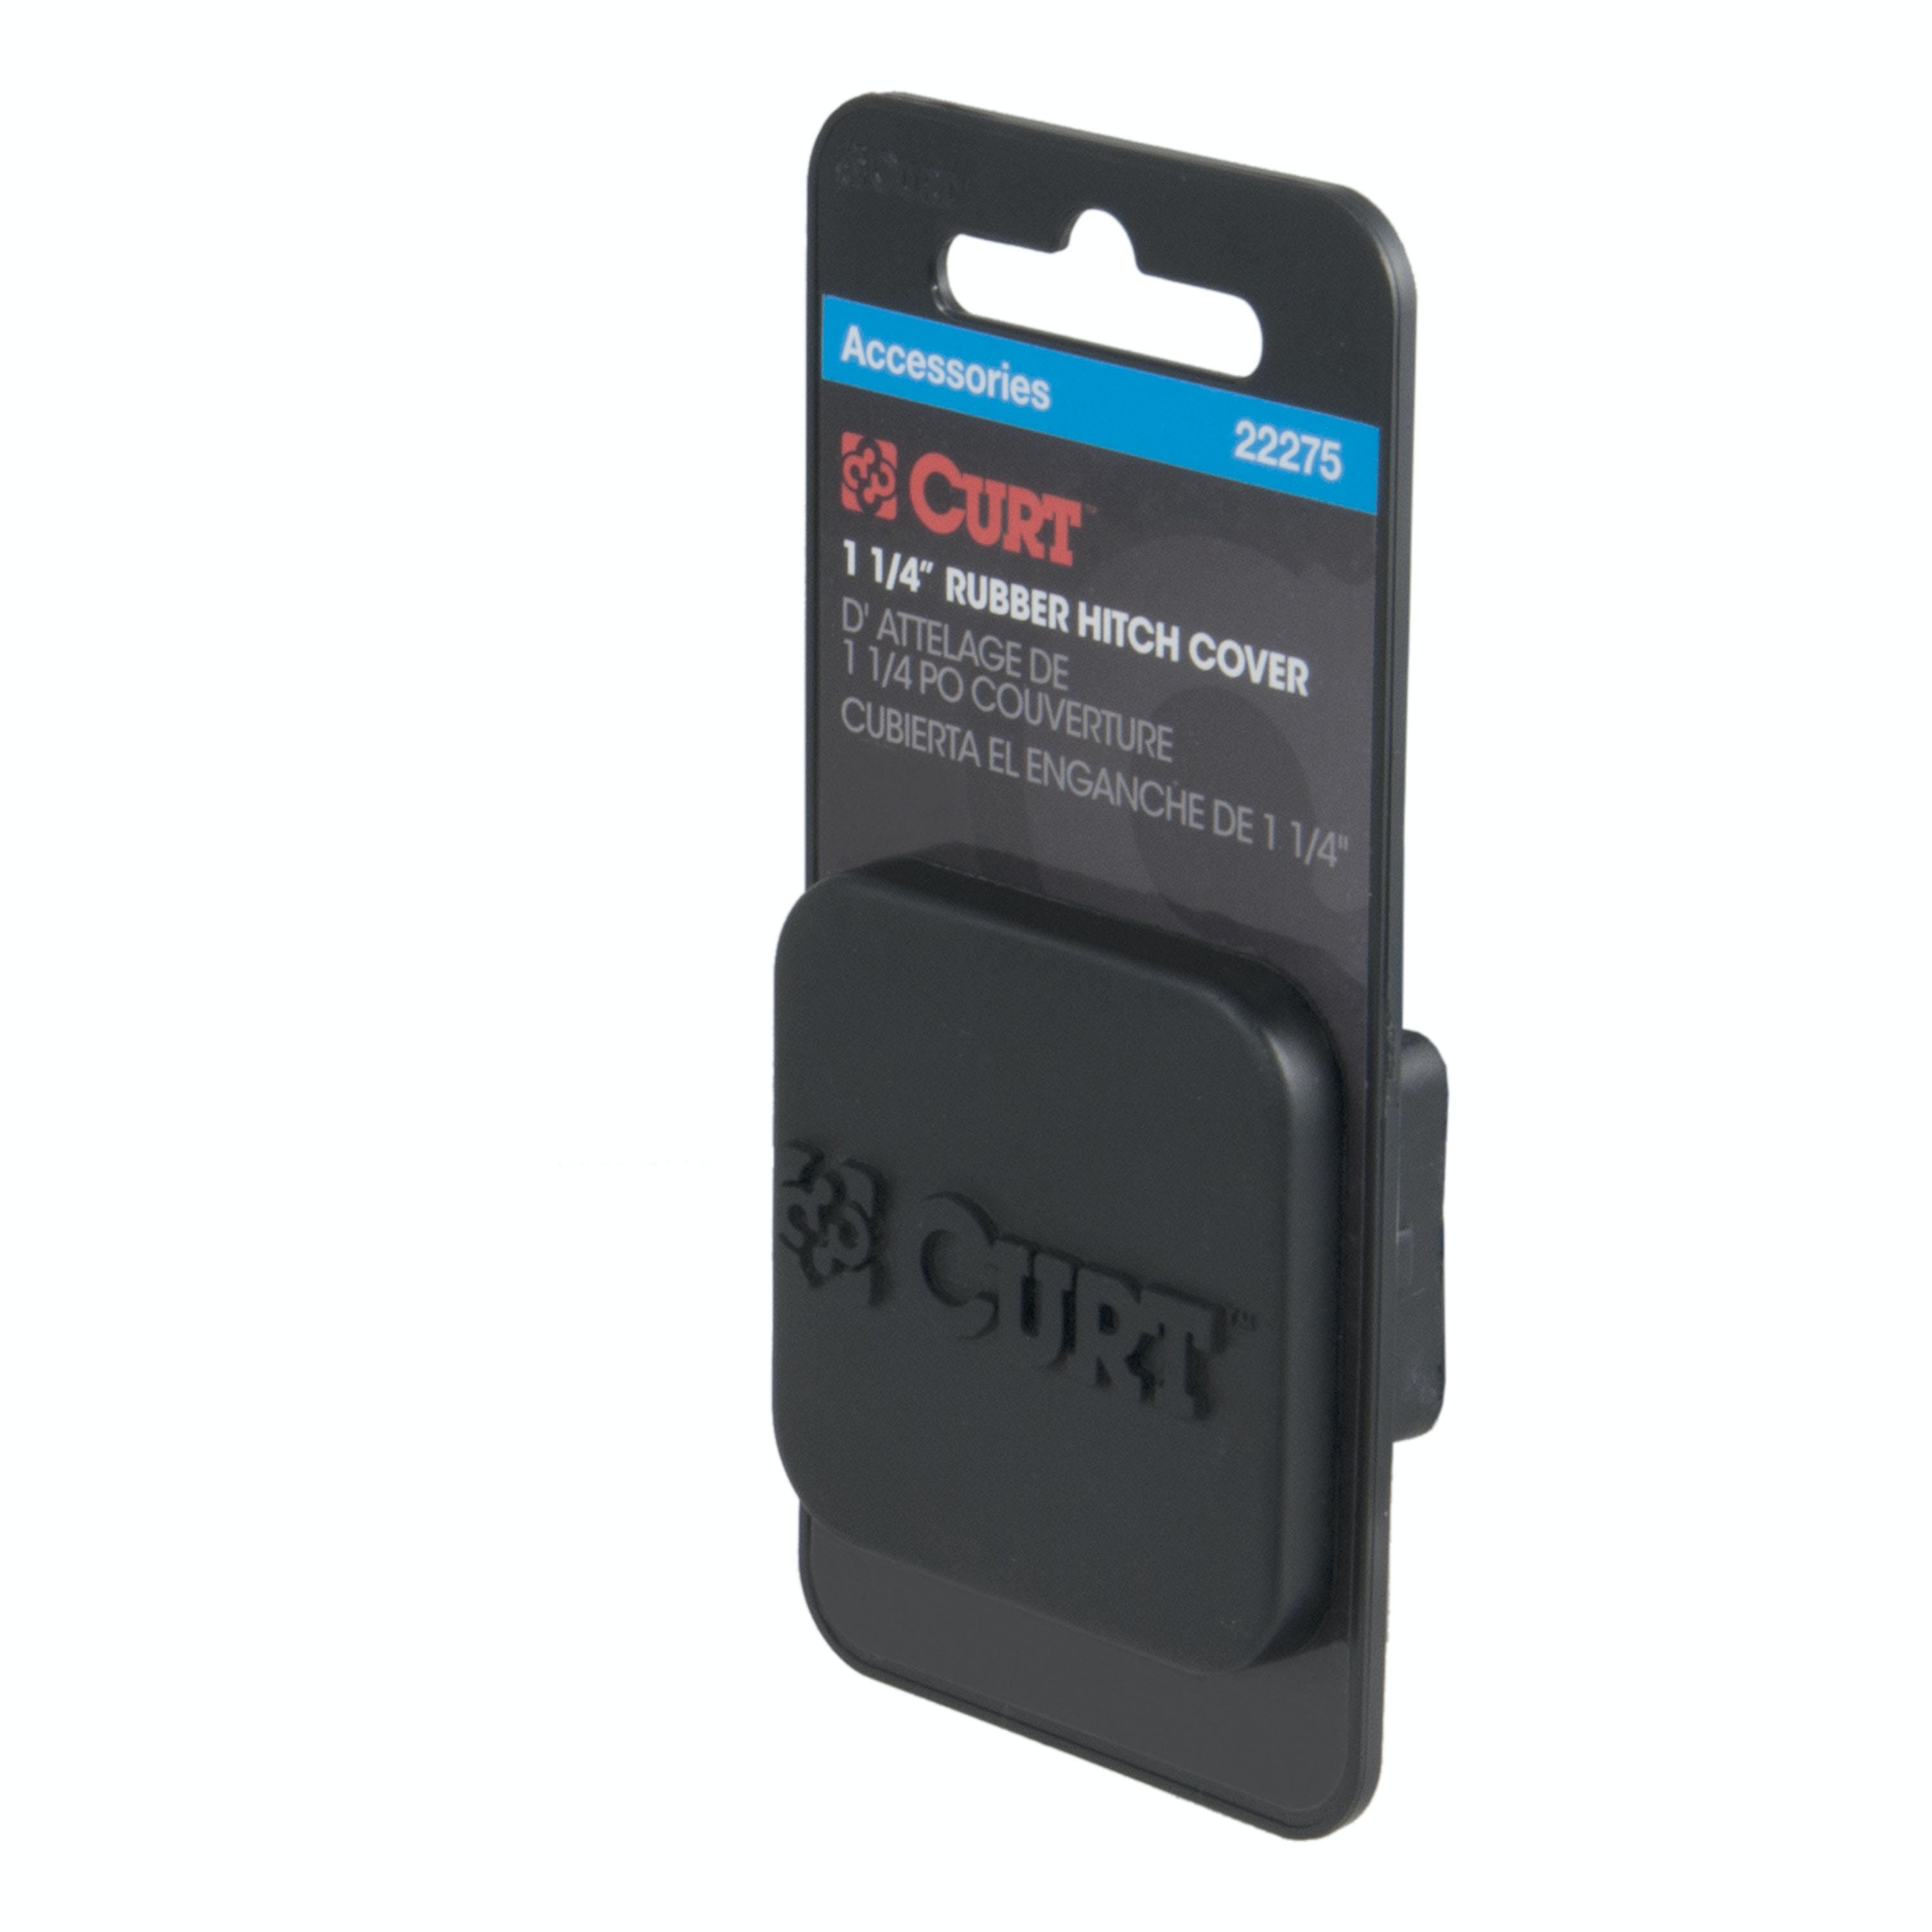 CURT 22275 1-1/4 Rubber Hitch Tube Cover (Packaged)